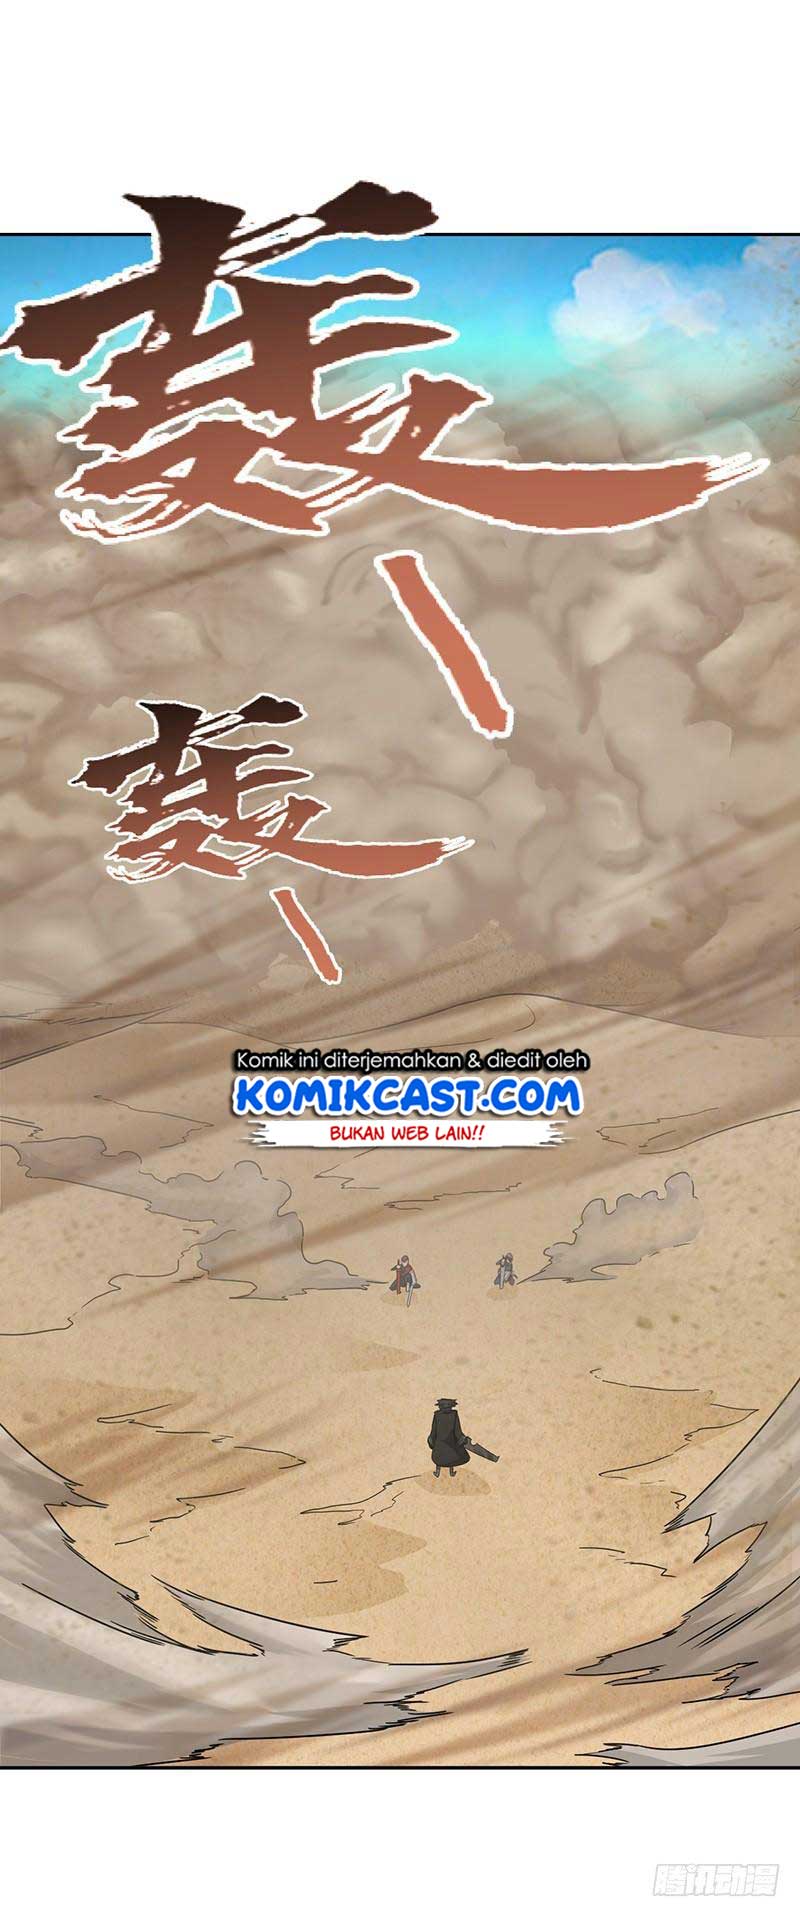 Chaotic Sword God Chapter 120